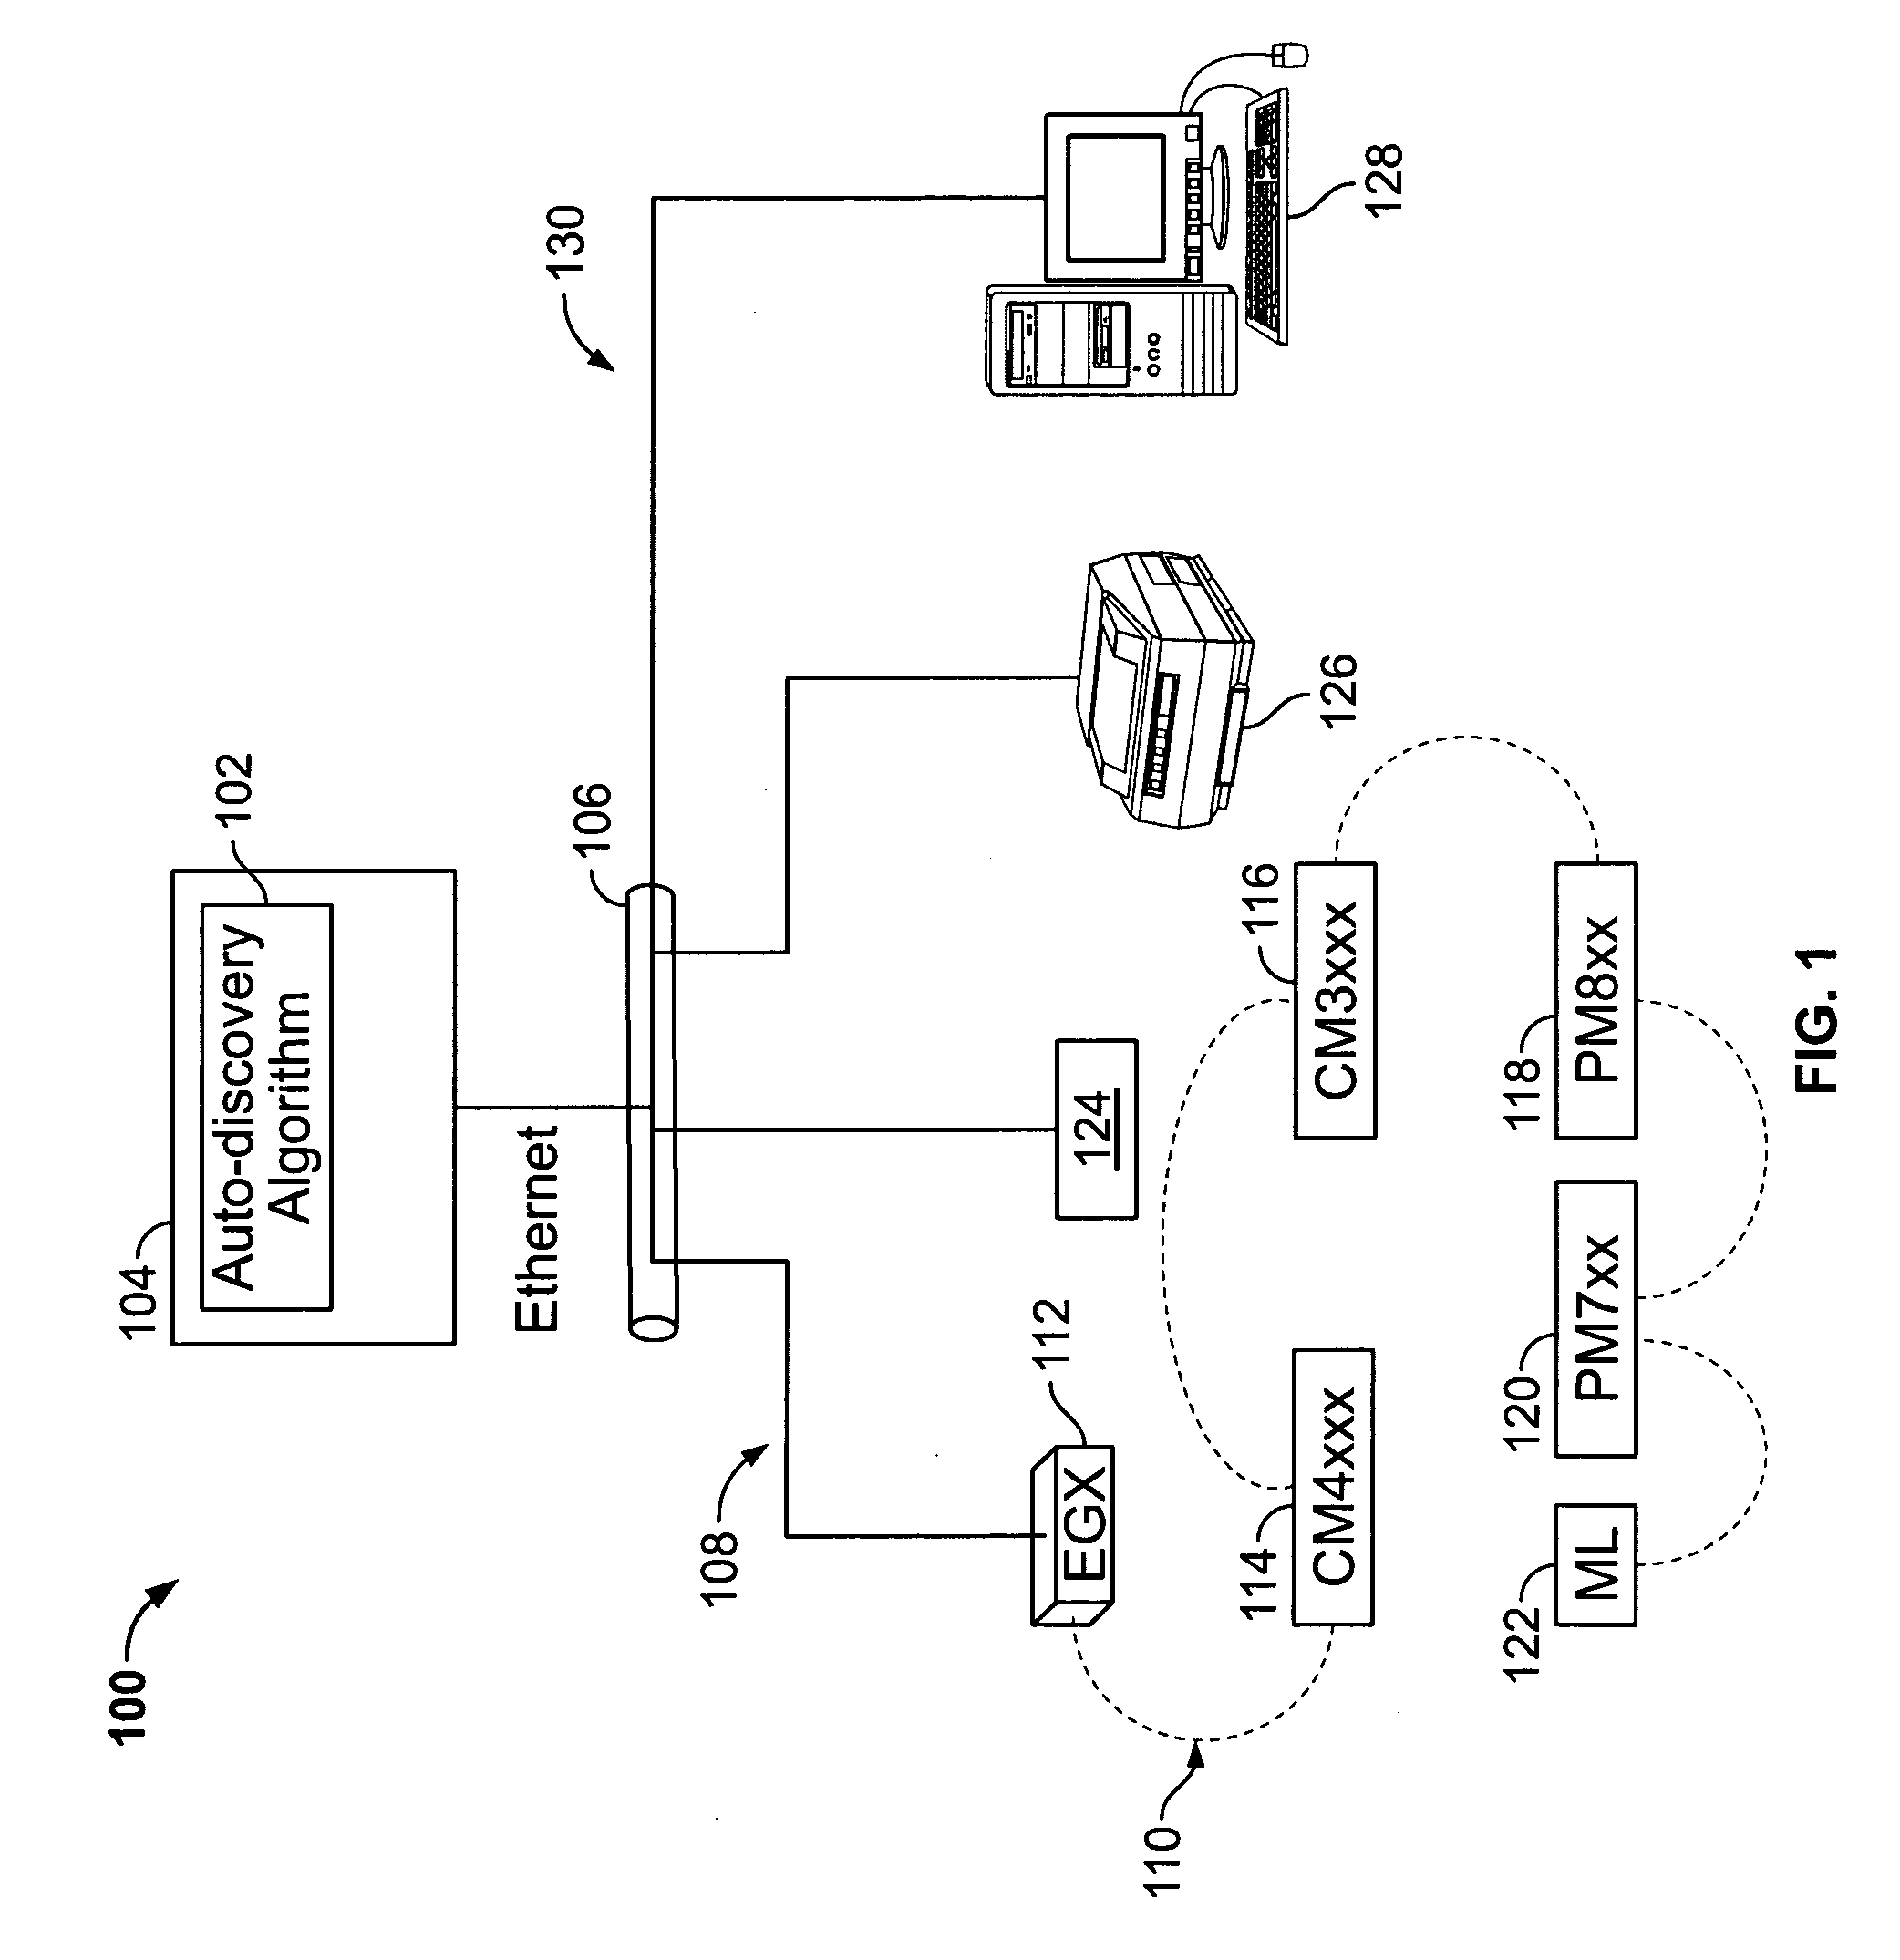 Automated discovery of devices in large utility monitoring systems